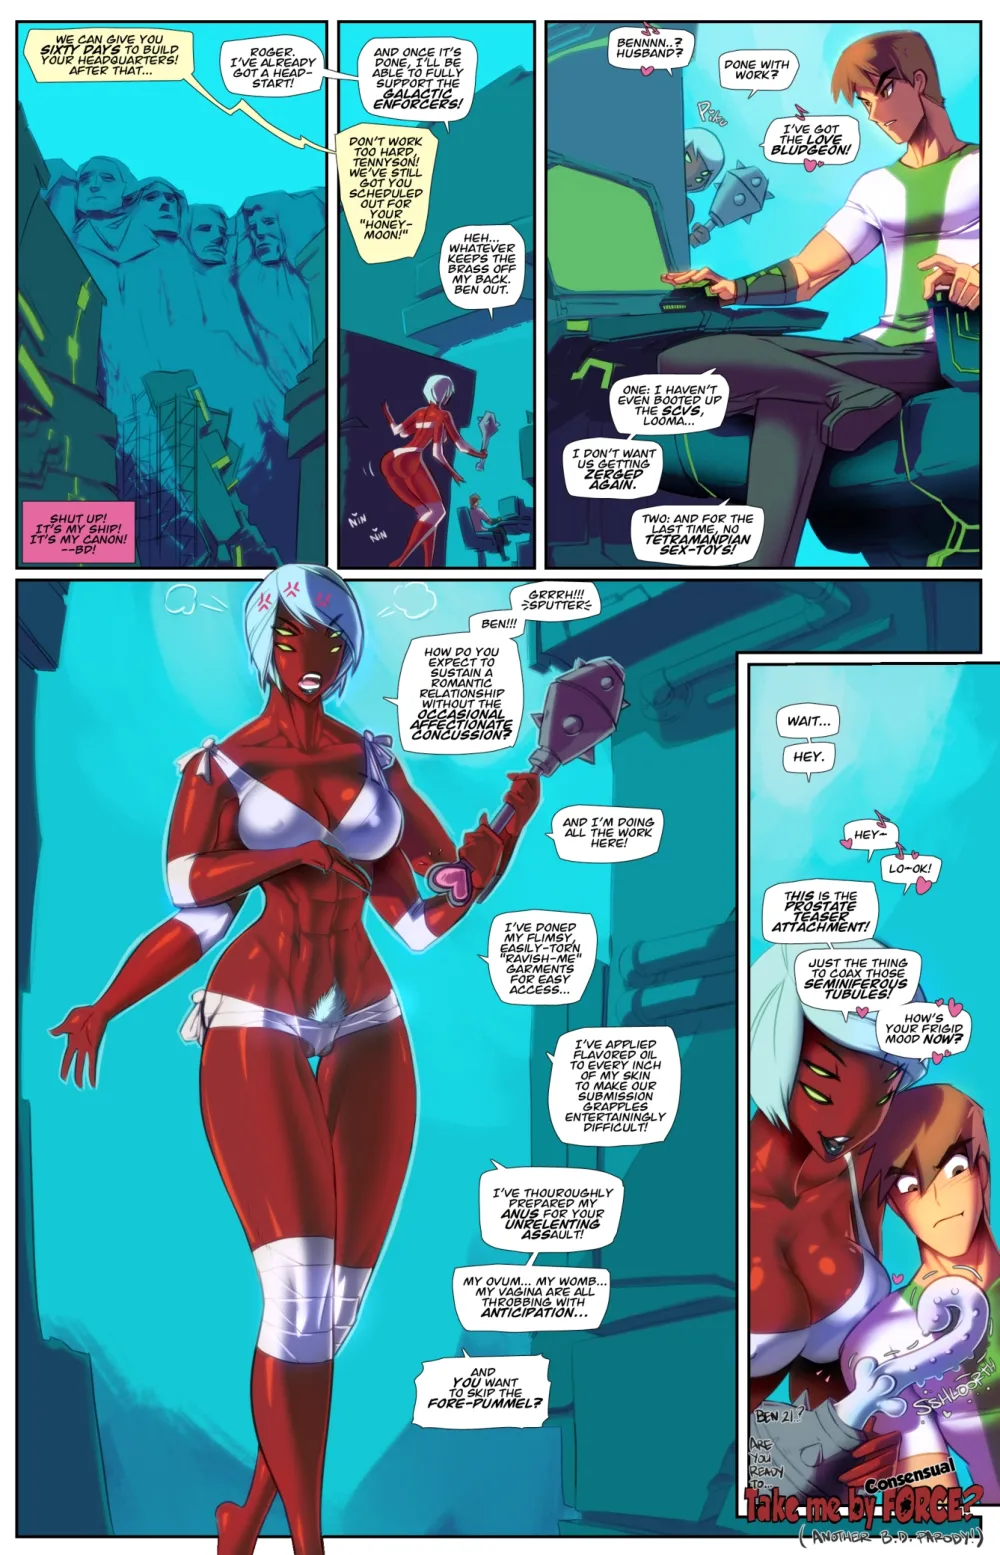 Take Me By (Consensual) Force? - Page 1